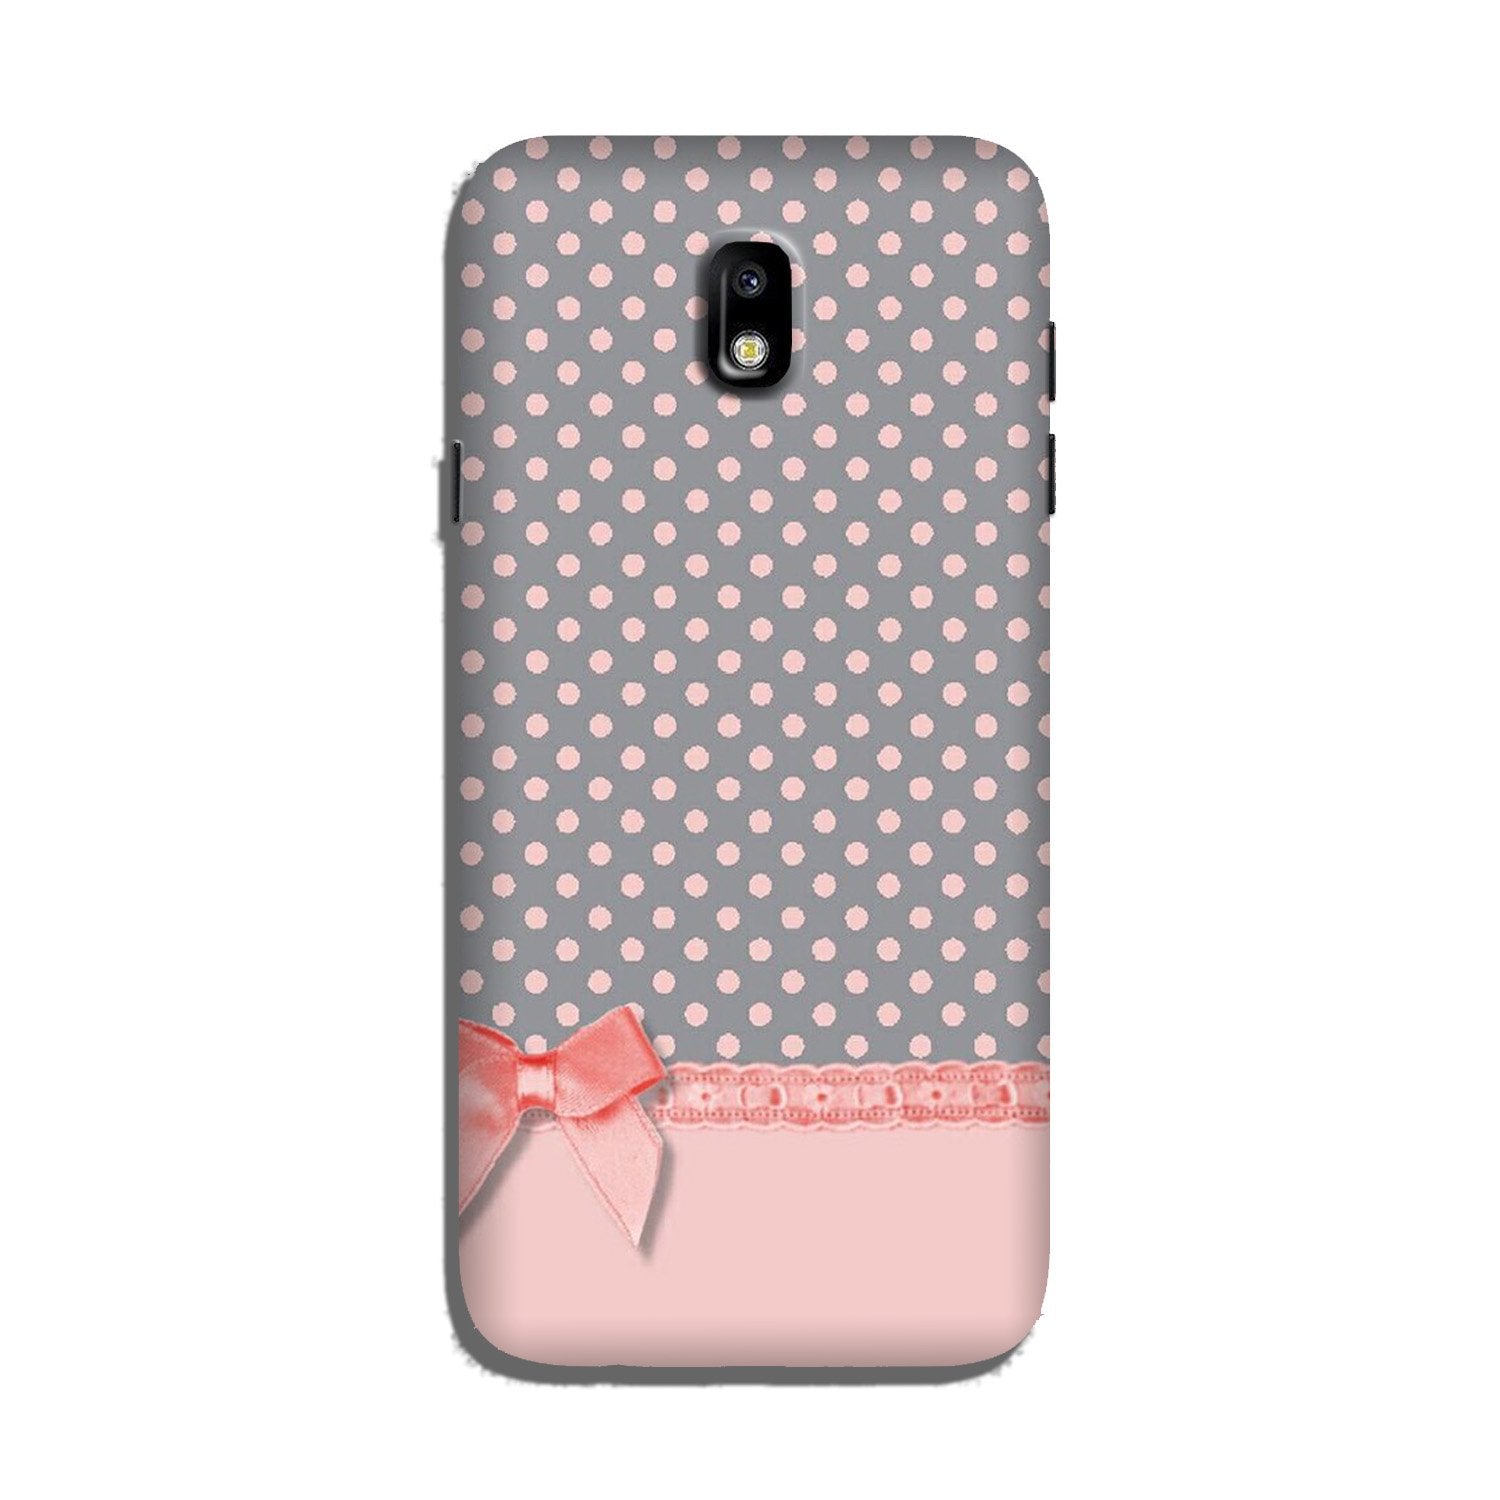 Gift Wrap2 Case for Galaxy J7 Pro